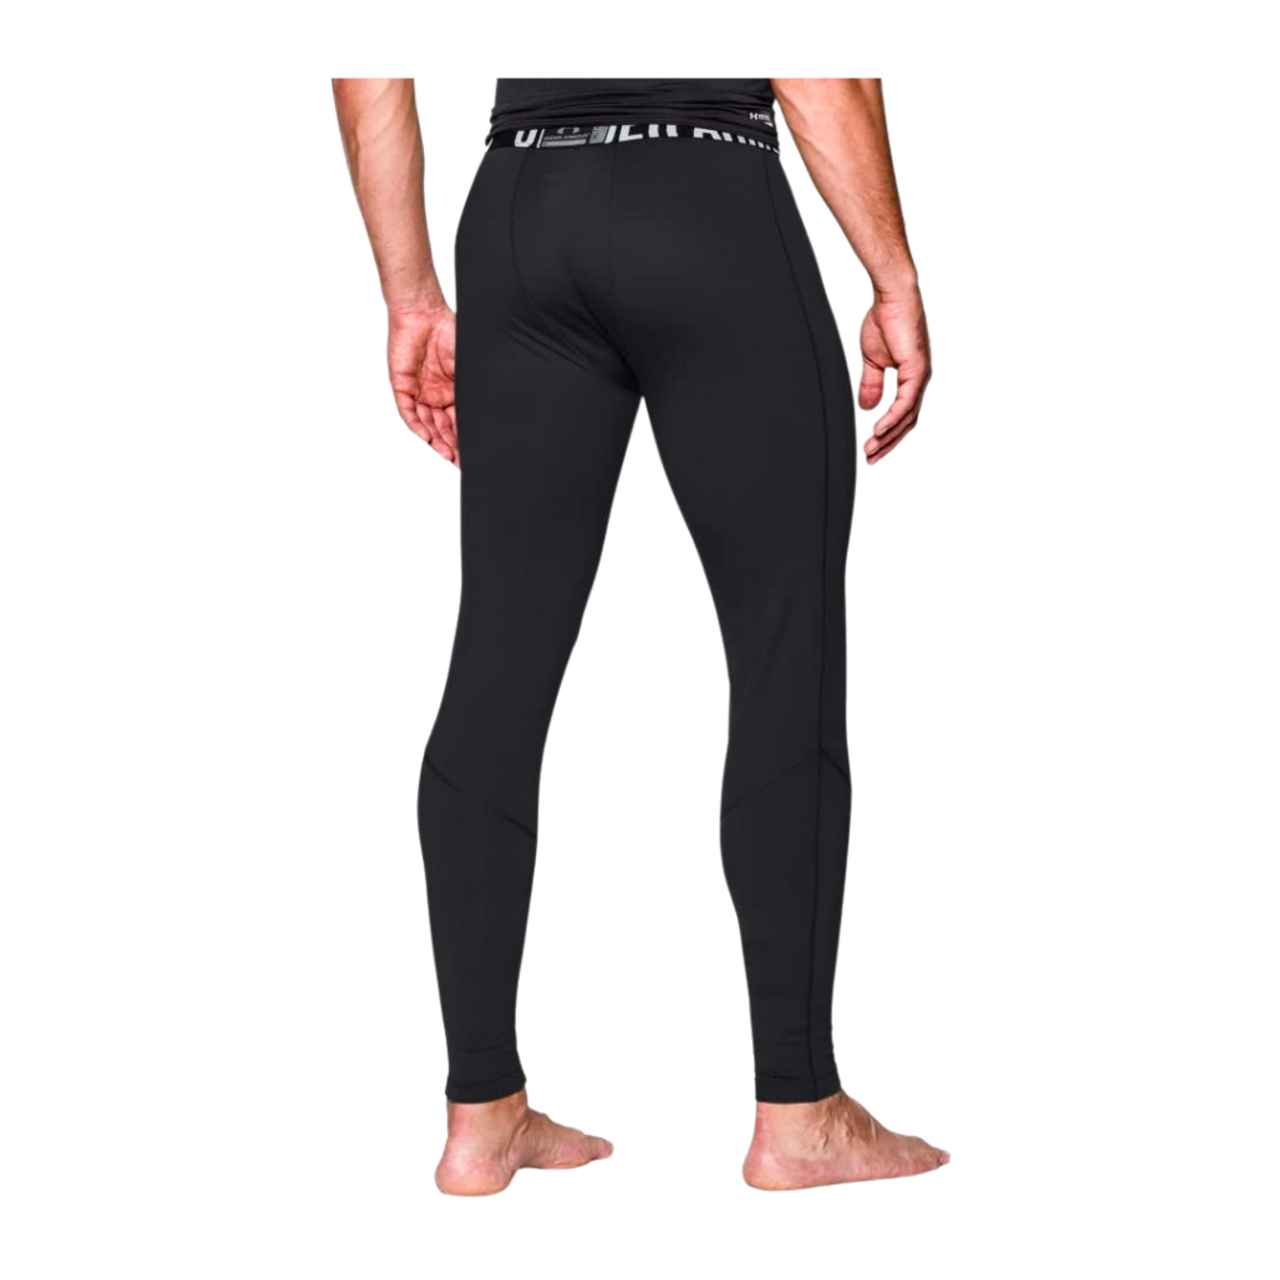 Separatec Men's Compression Pants with Dual India | Ubuy